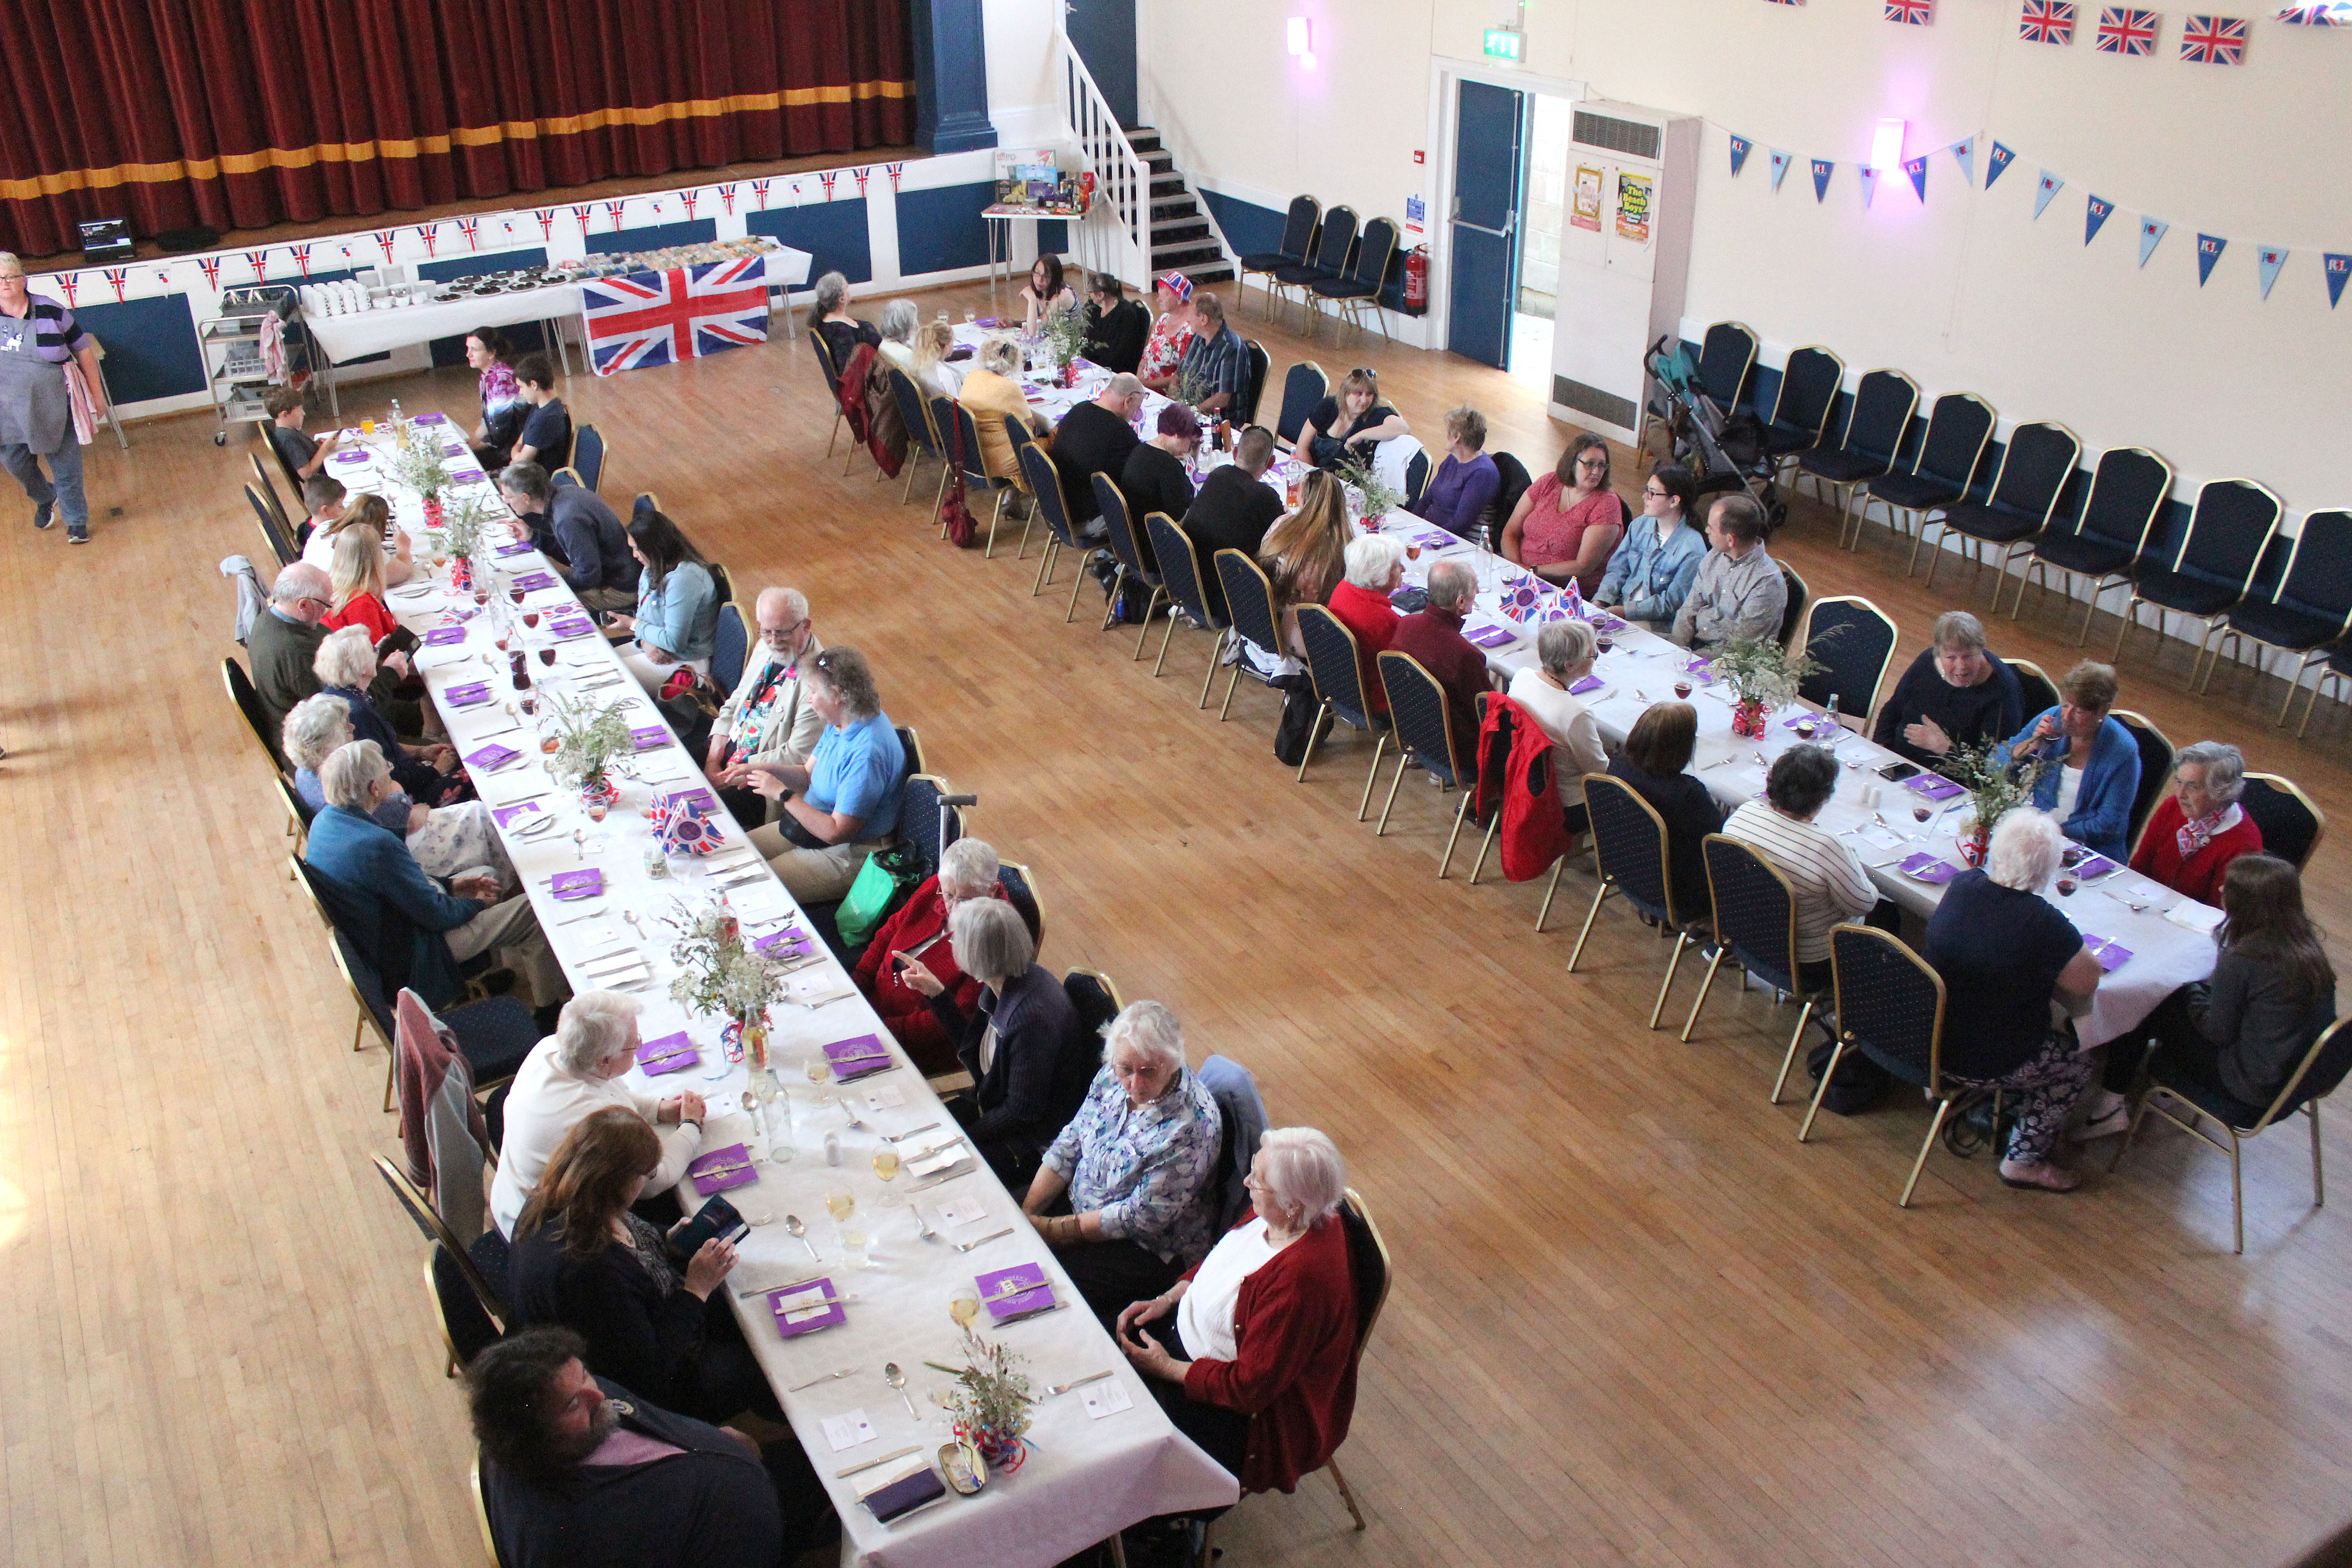 The Nourish jubilee lunch at Axminster Guildhall